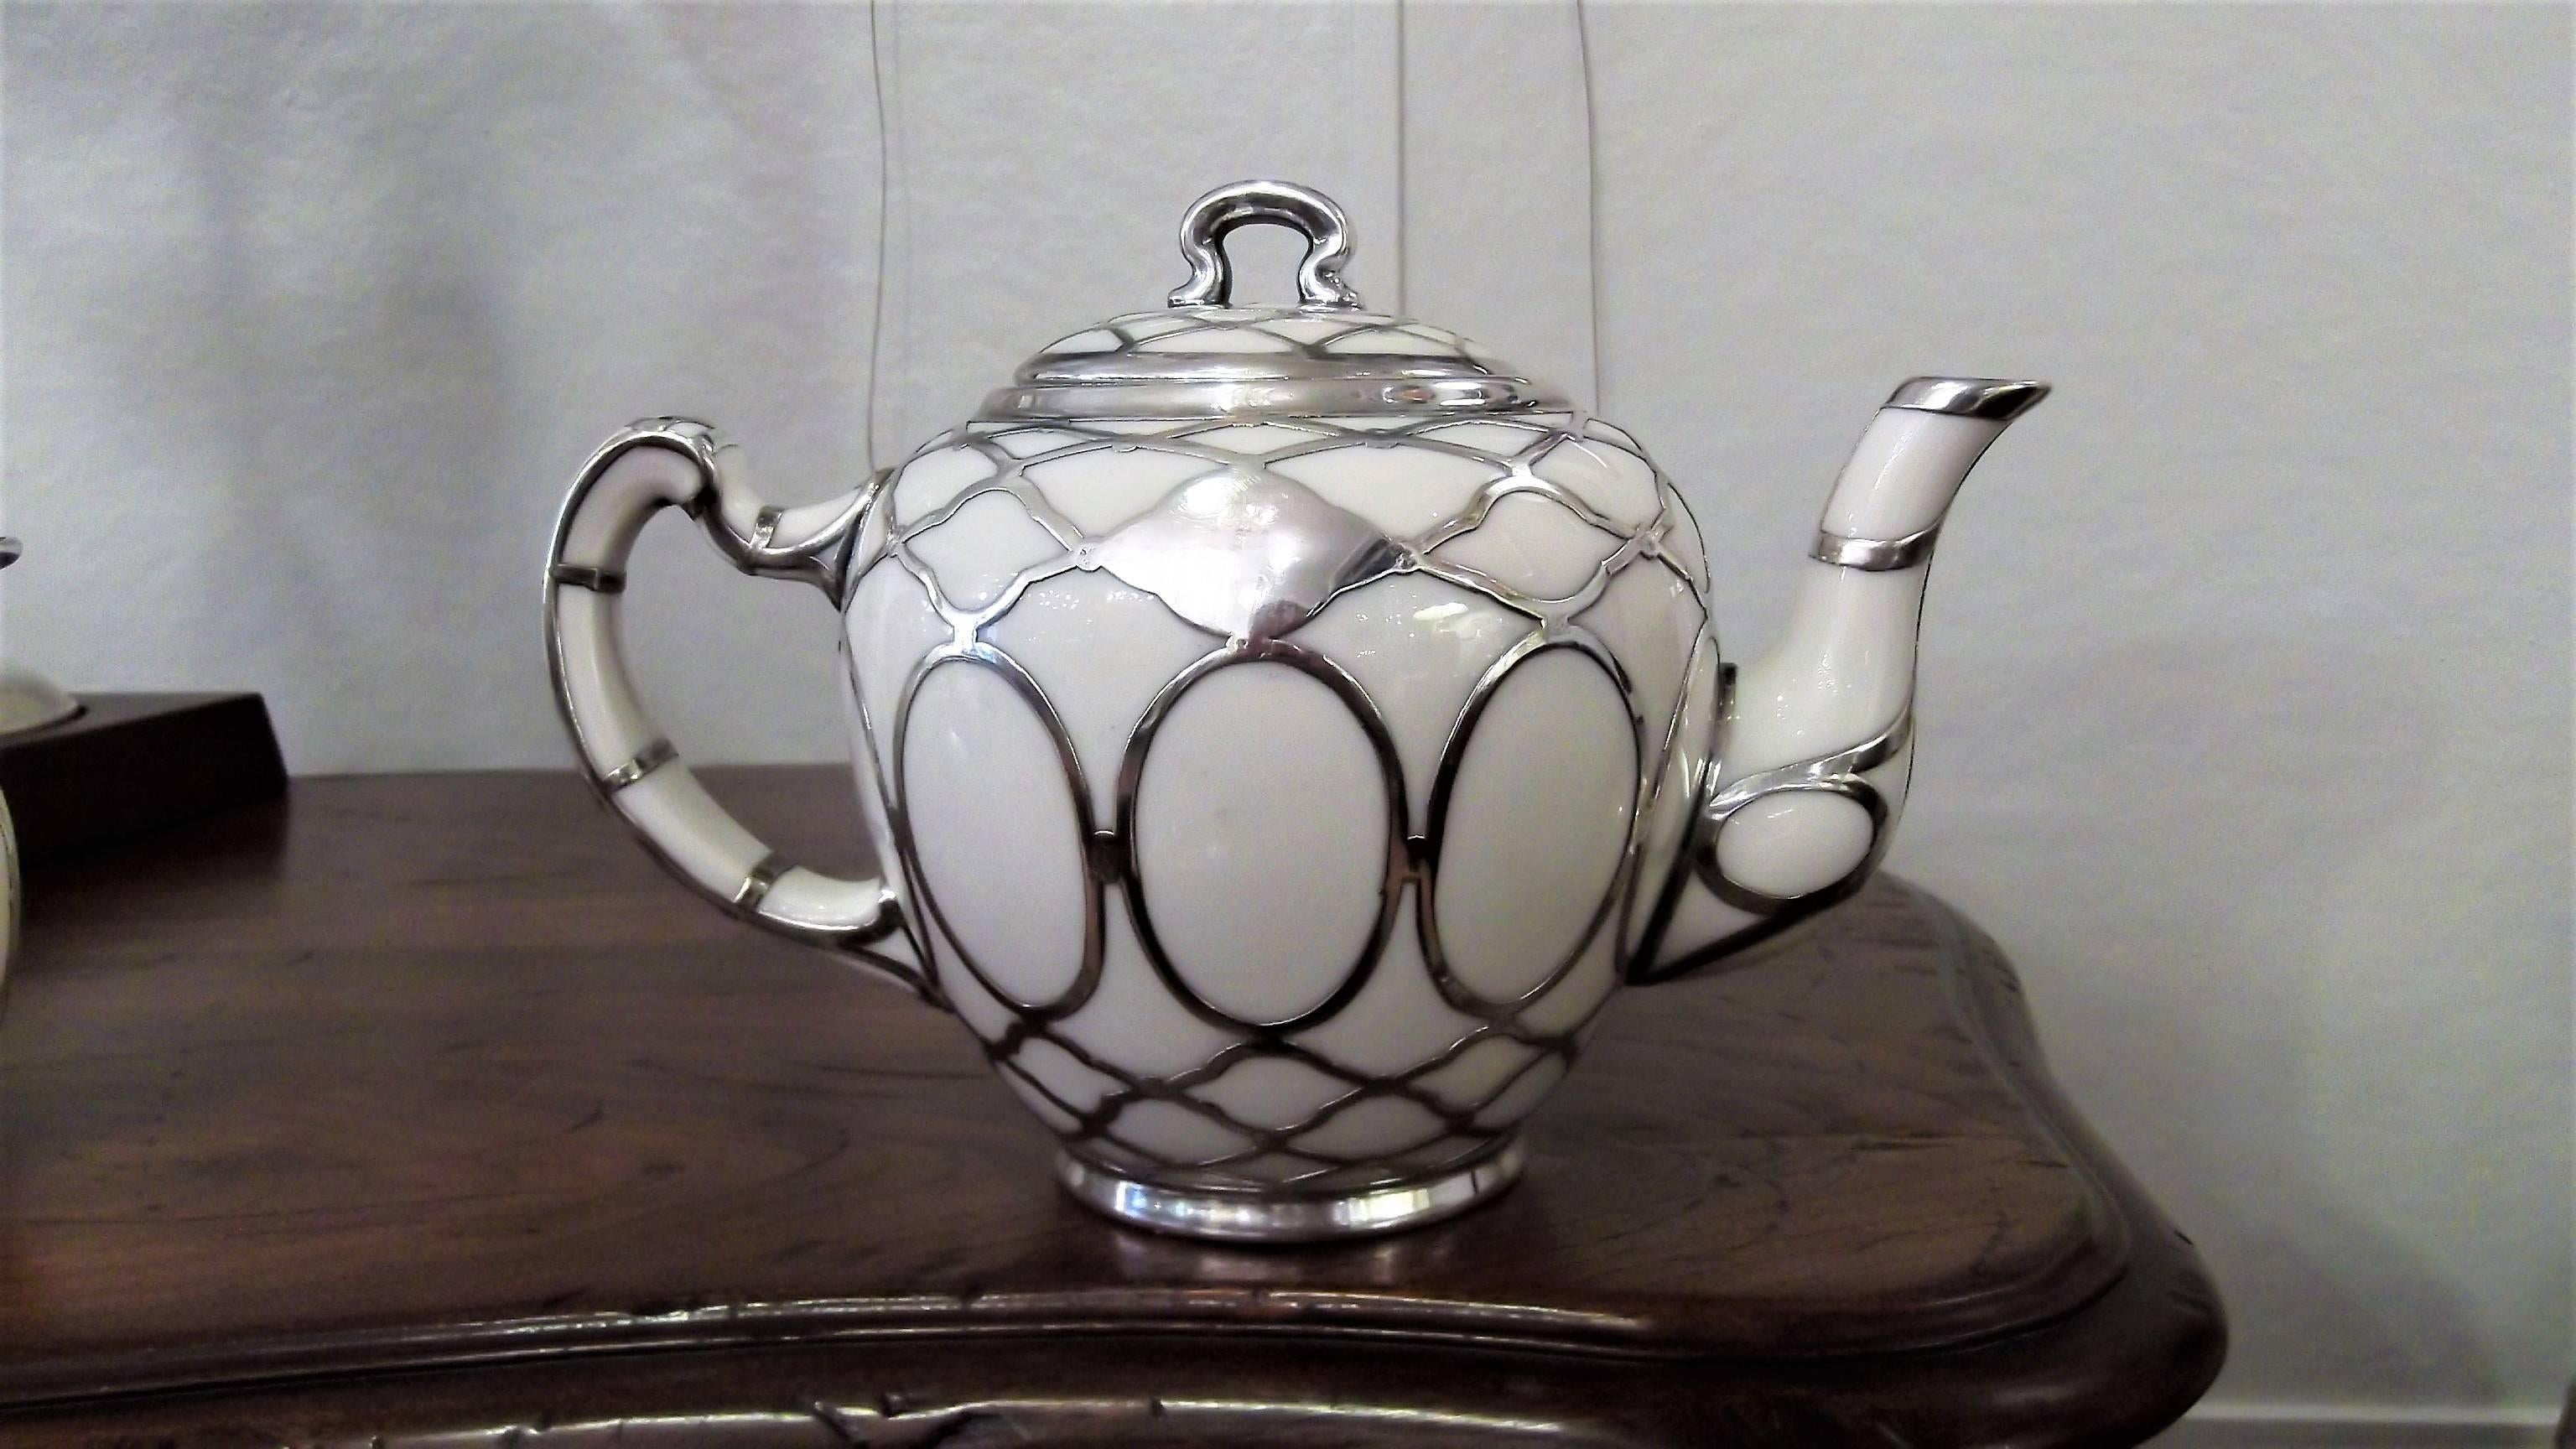 Beautiful three-piece tea set with sterling silver overlay. Early 20th century Lenox green mark on the bottom. The teapot retains its original strainer used for make tea with loose tea. Complete with its small milk jug and lidded sugar bowl.